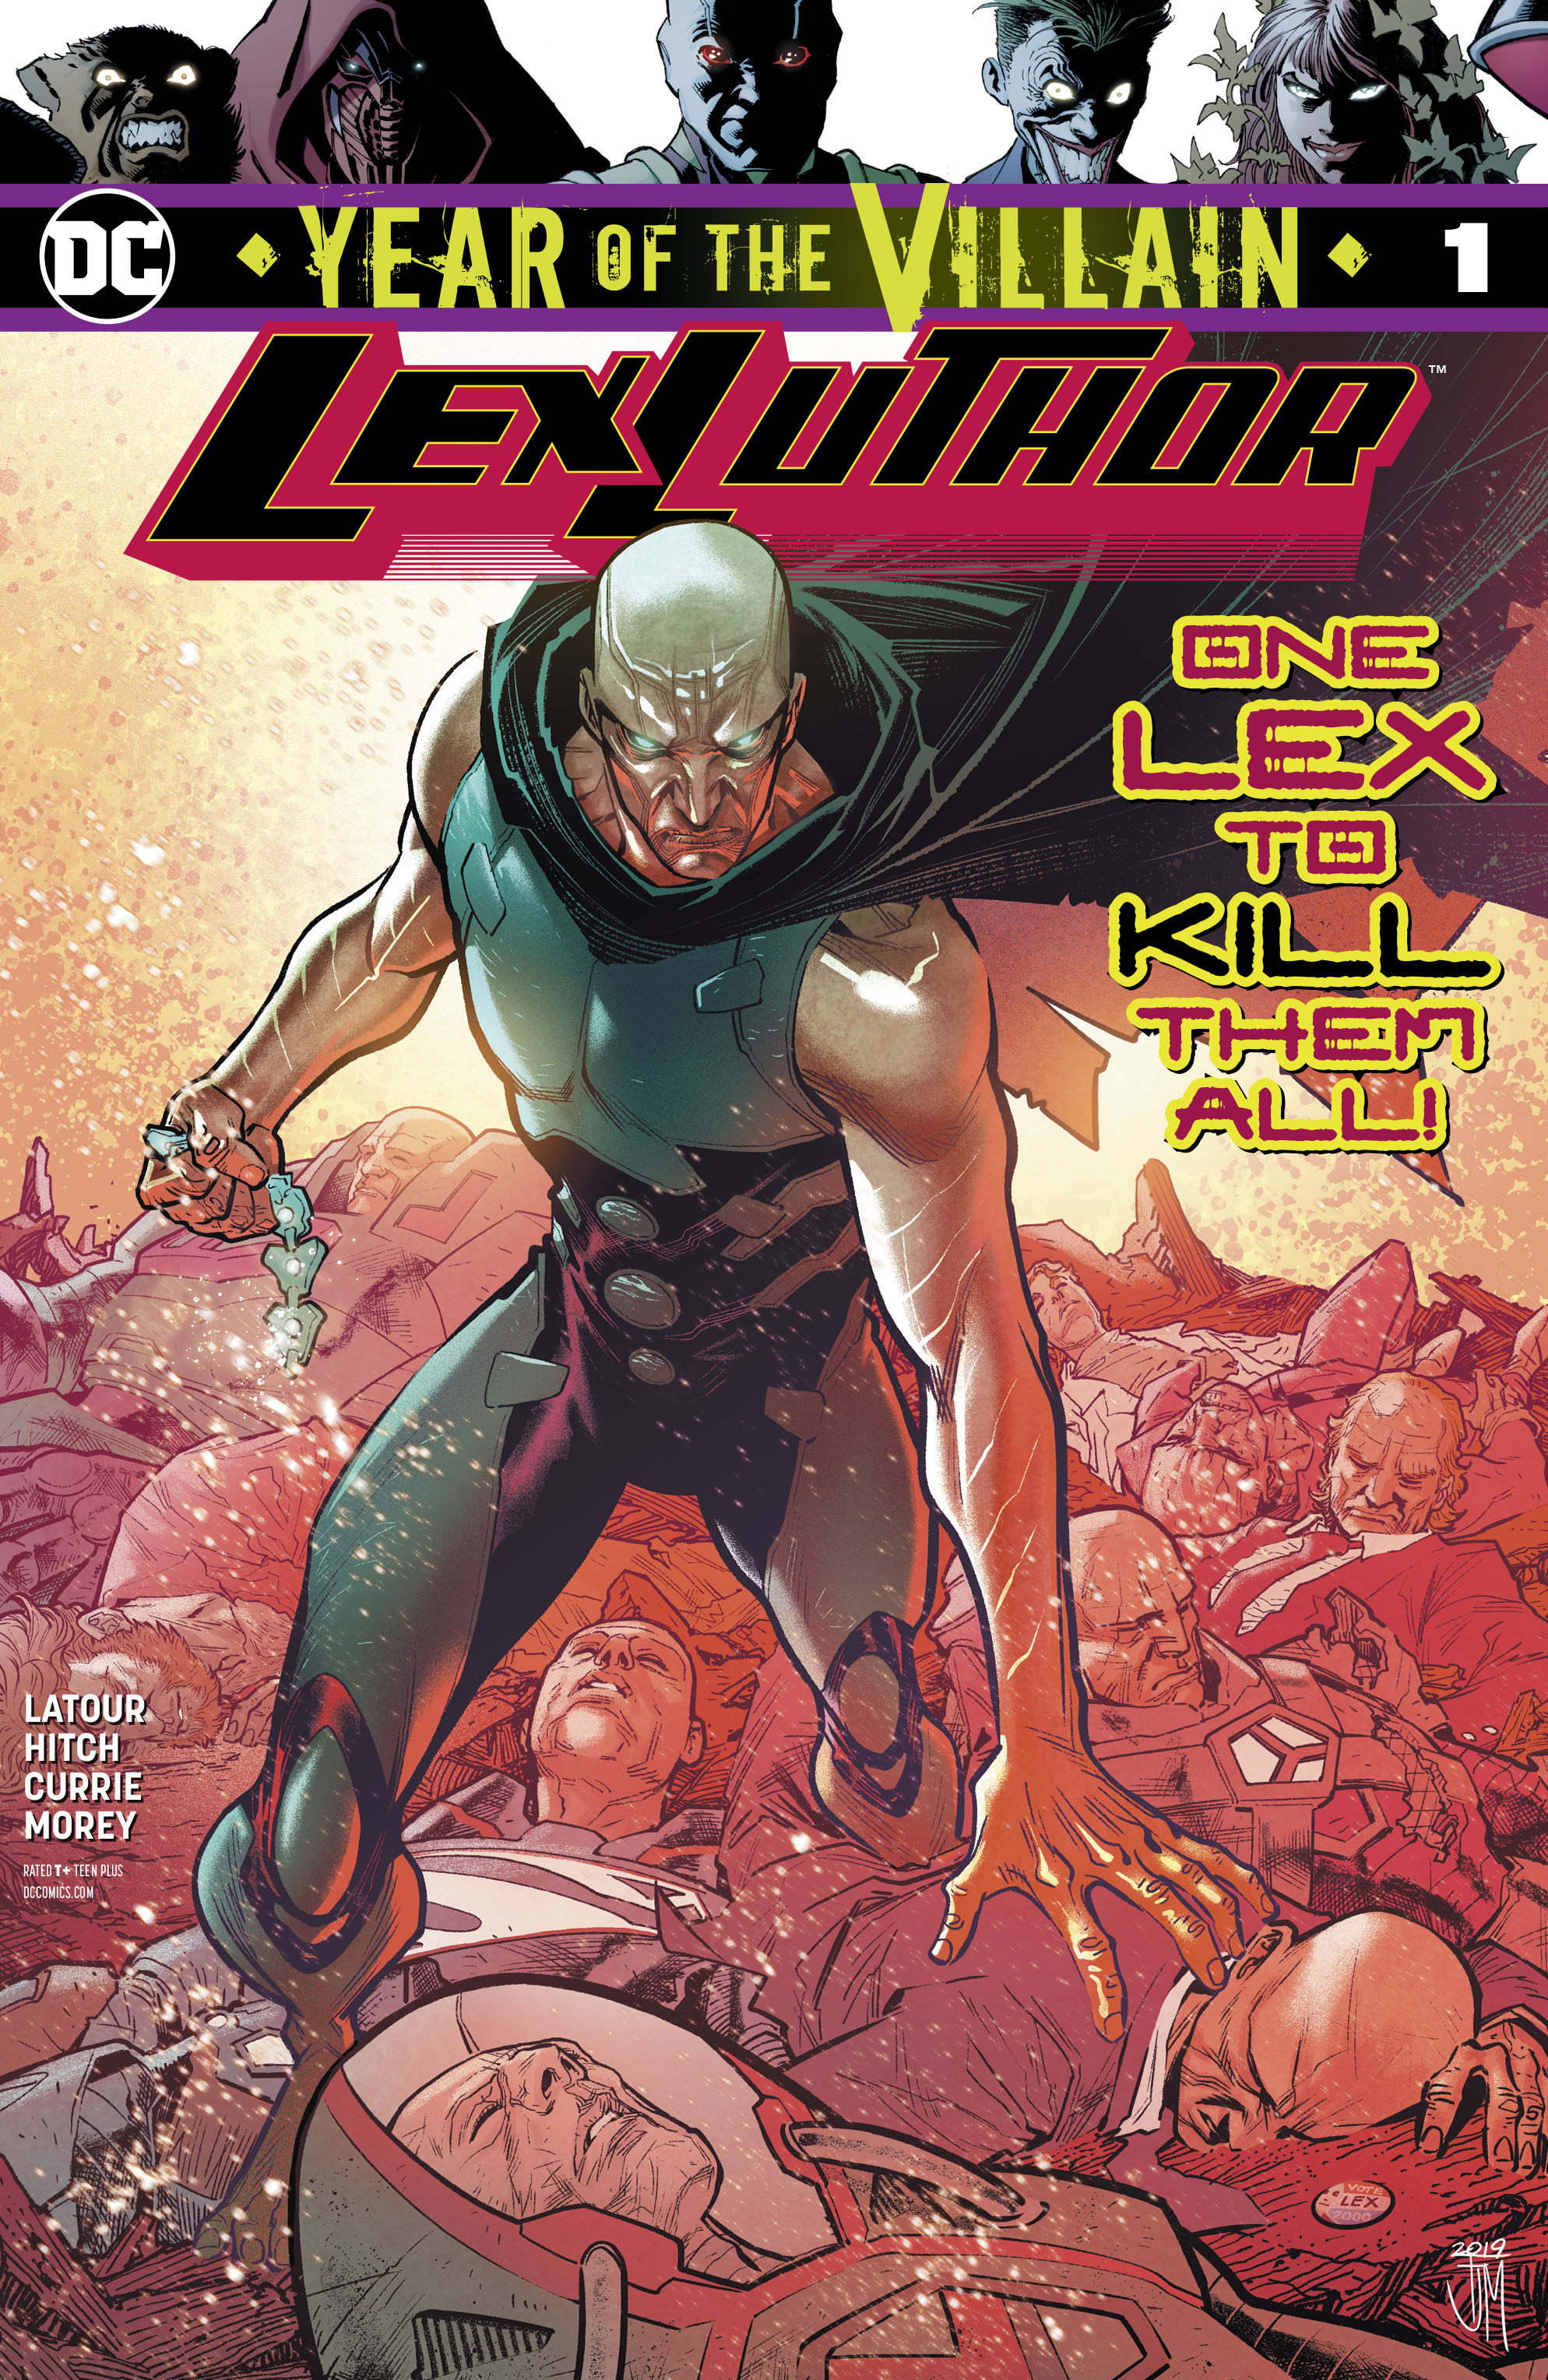 Read online Lex Luthor: Year of the Villain comic -  Issue # Full - 1